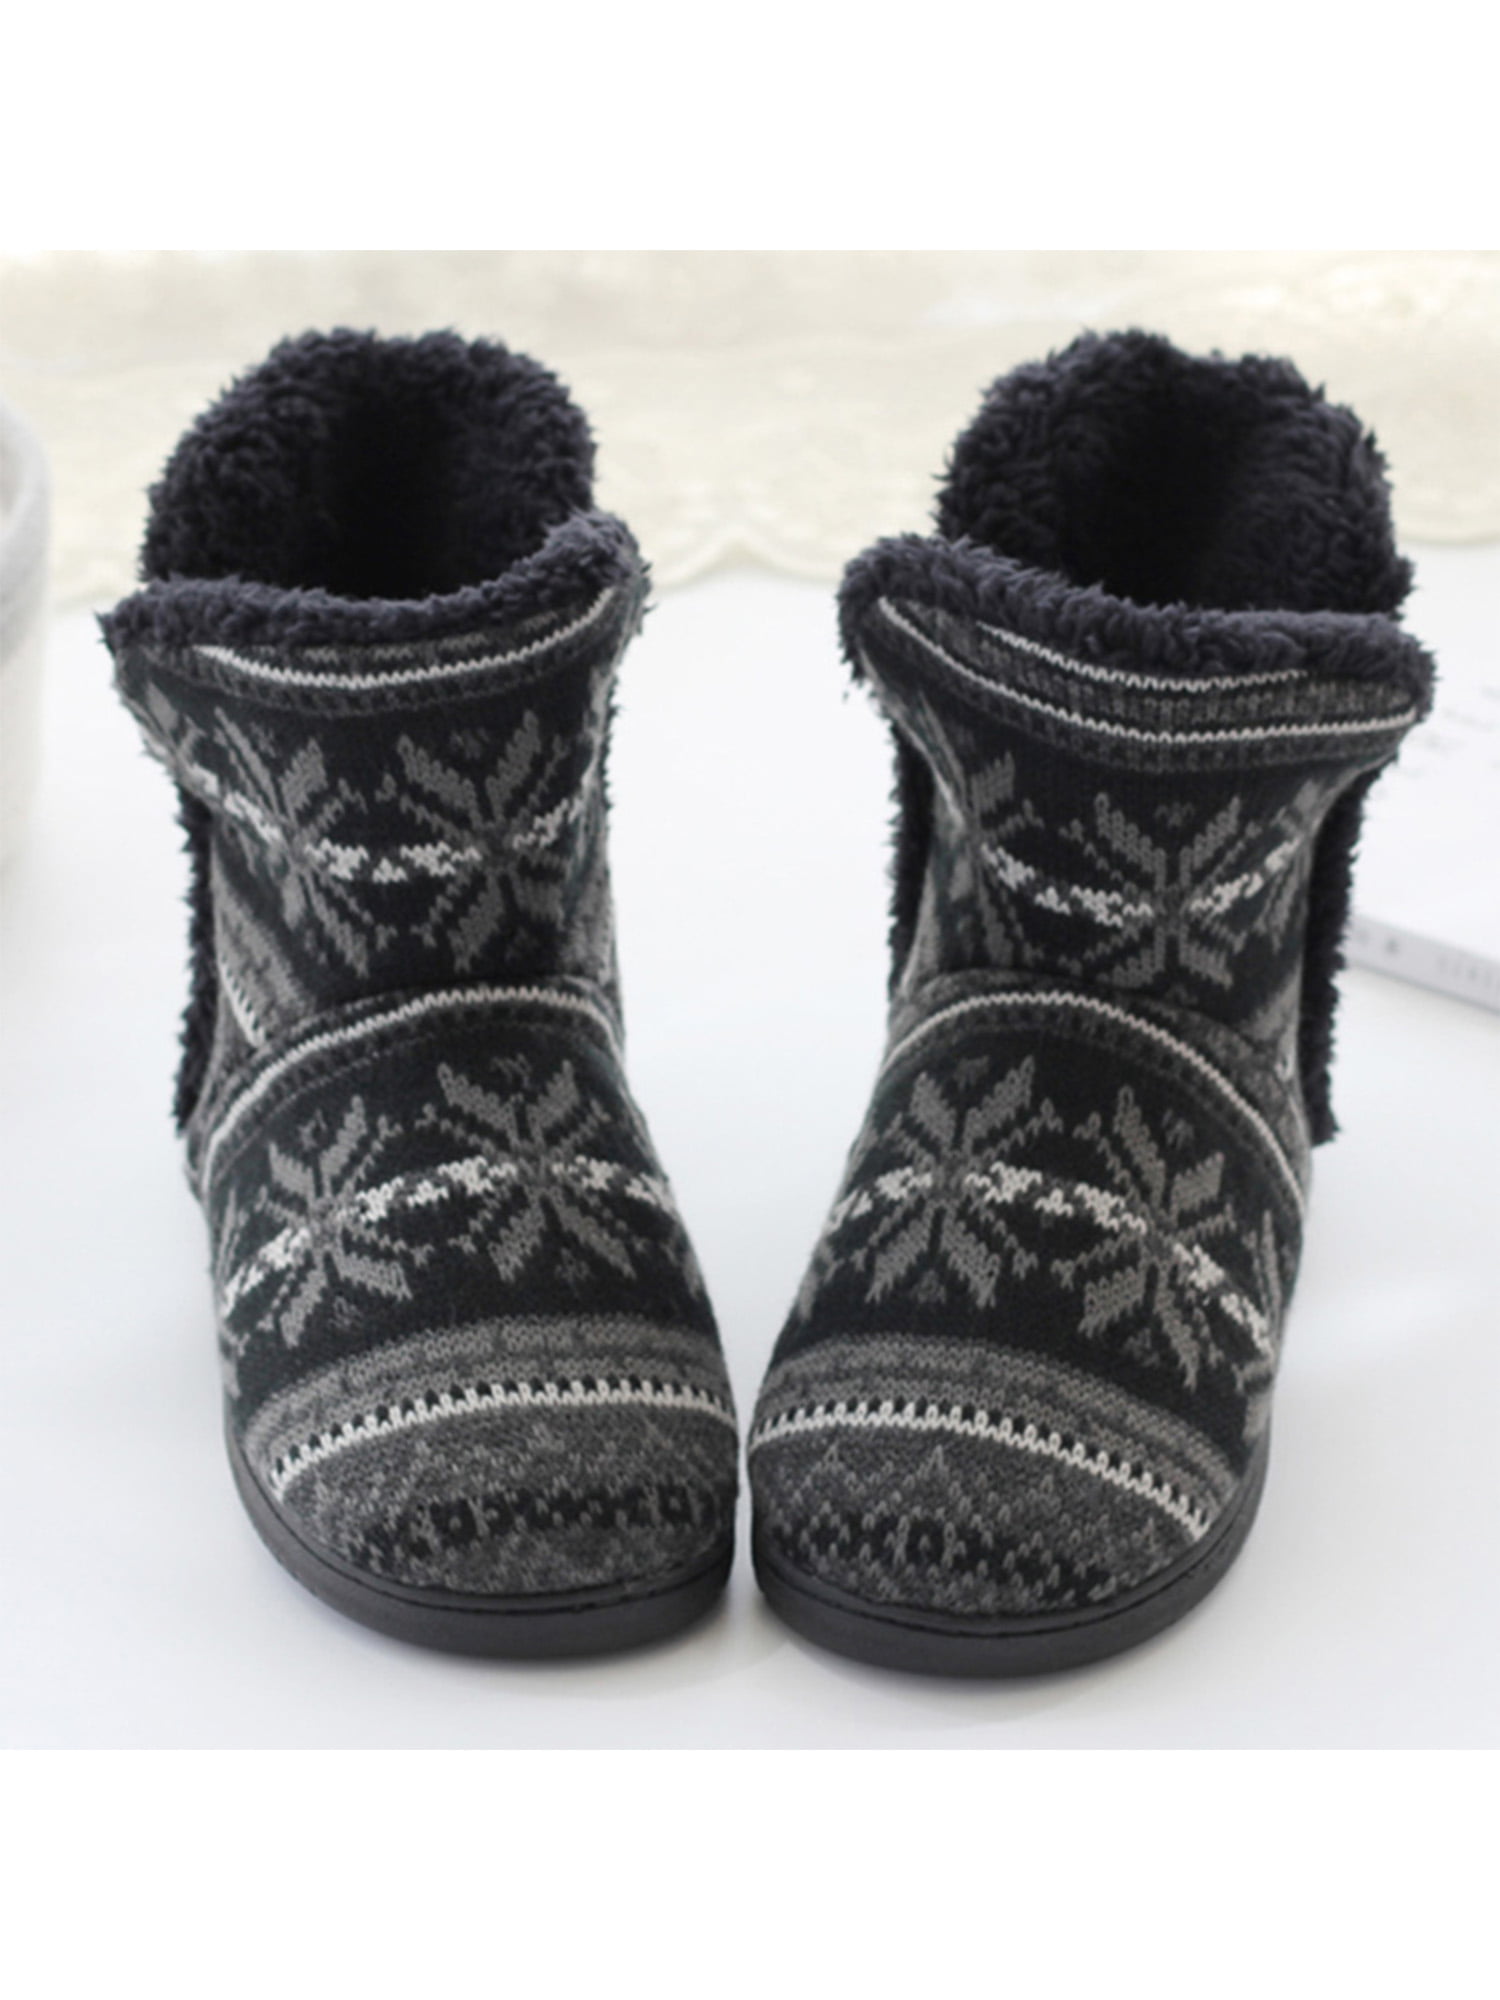 Women's Mens Snow Boots Winter Warm Casual Indoor Ankle Outdoor Slippers Shoes 